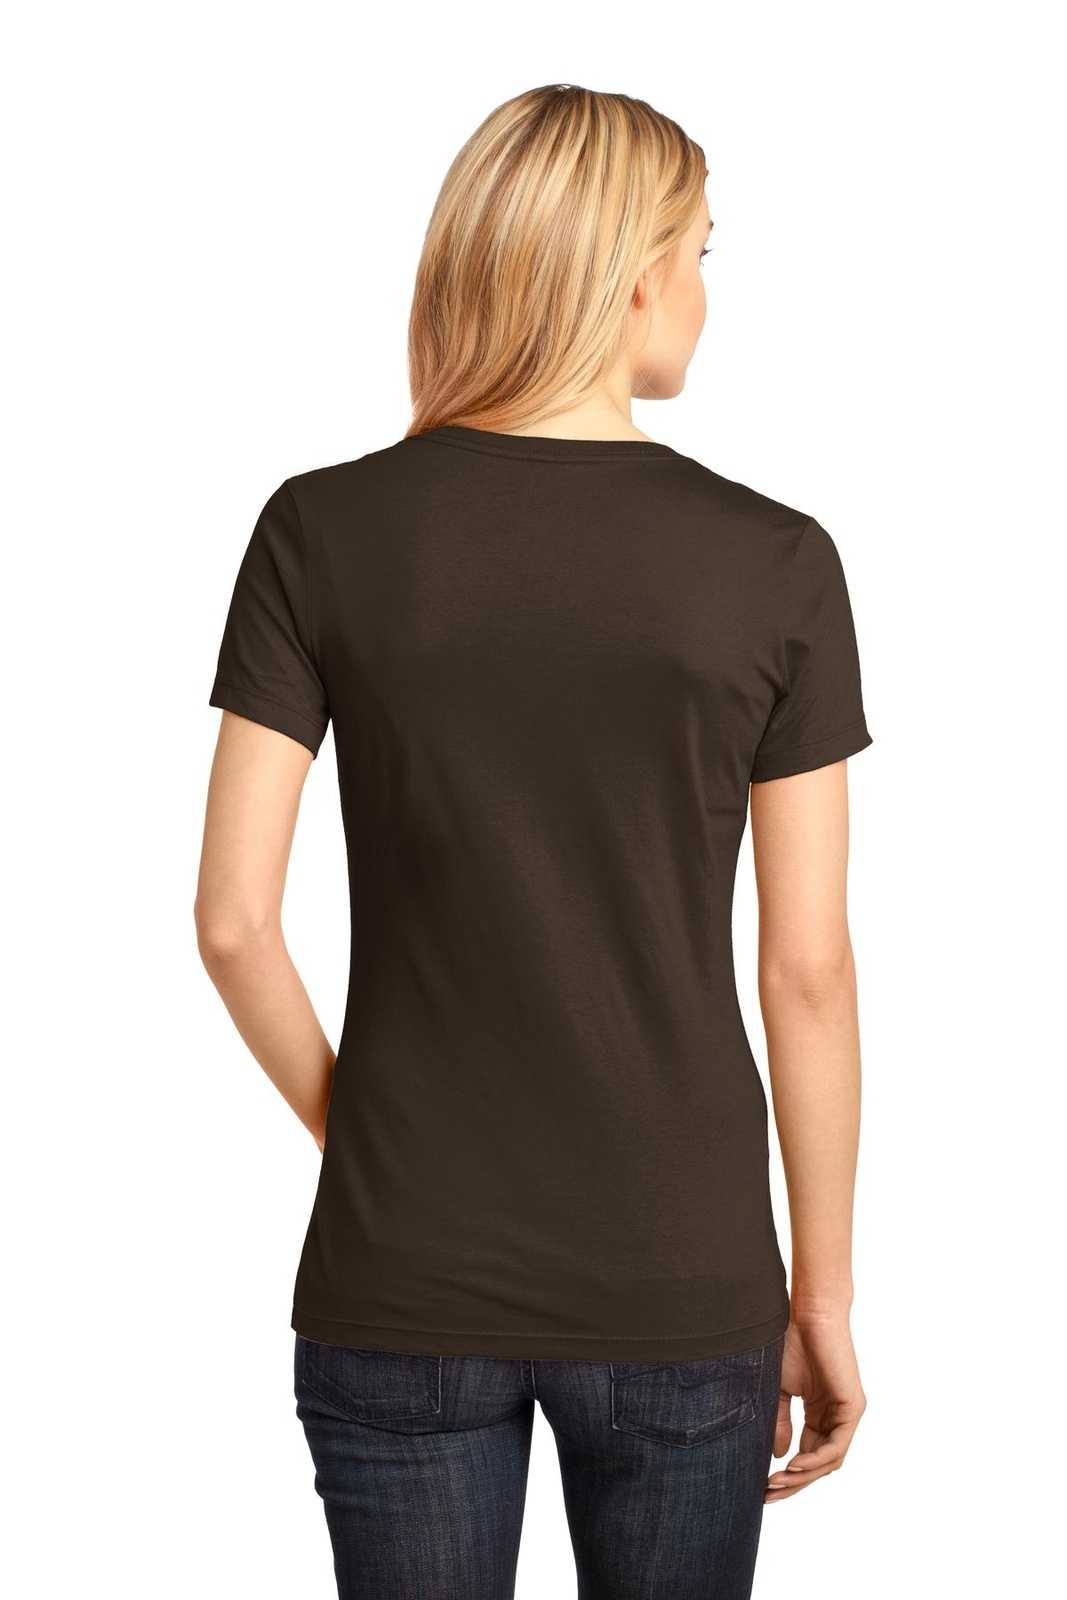 District DM1170L Women's Perfect Weight V-Neck Tee - Espresso - HIT a Double - 1